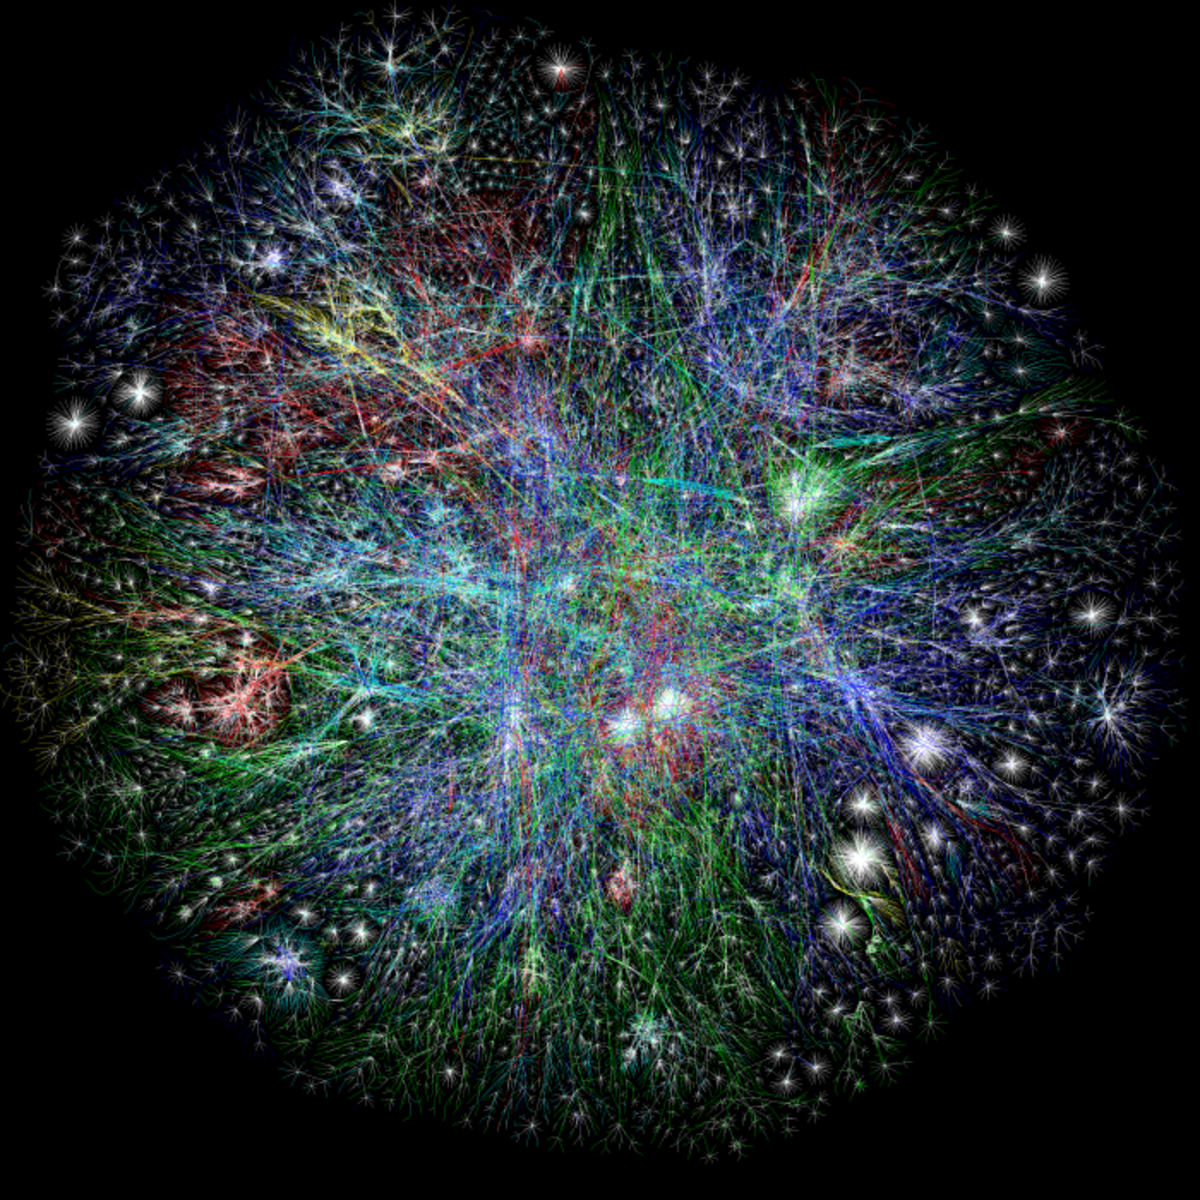 streaming-the-metamedia-tweetwerverse-mimezines-streaming-cyber-consciousness-and-extension-of-us-in-datasphere